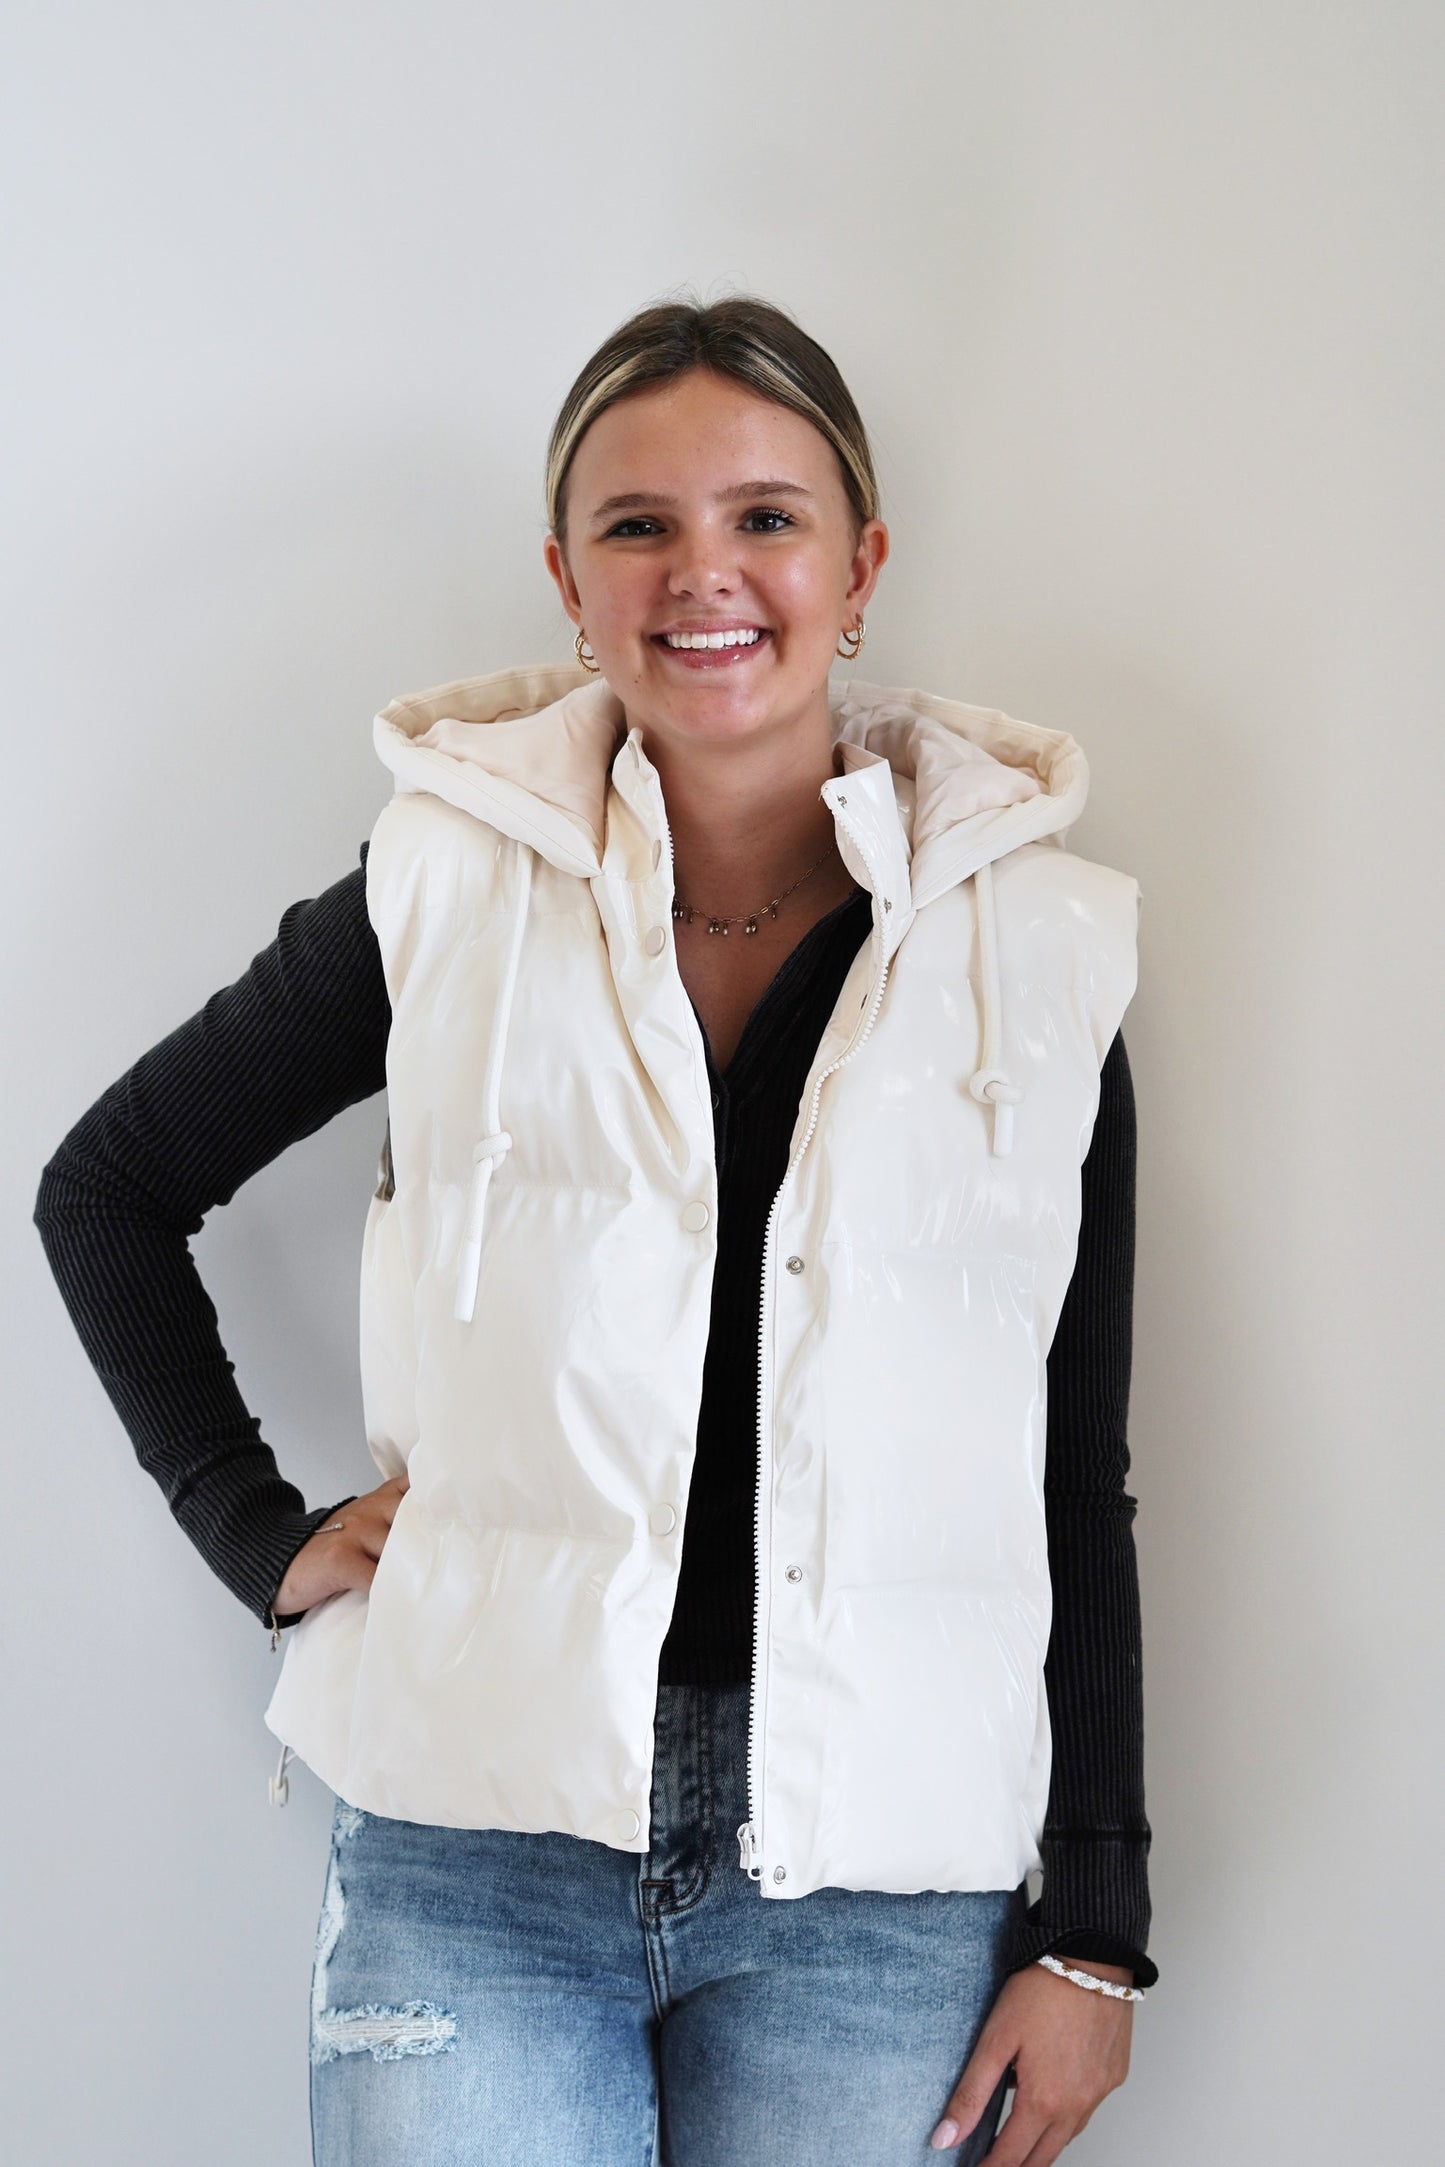 Shimmer Faux Leather Vest Hooded Neckline Full Length Sleeveless Button And Zipper Closure Down Vest Fitted Color:Cream